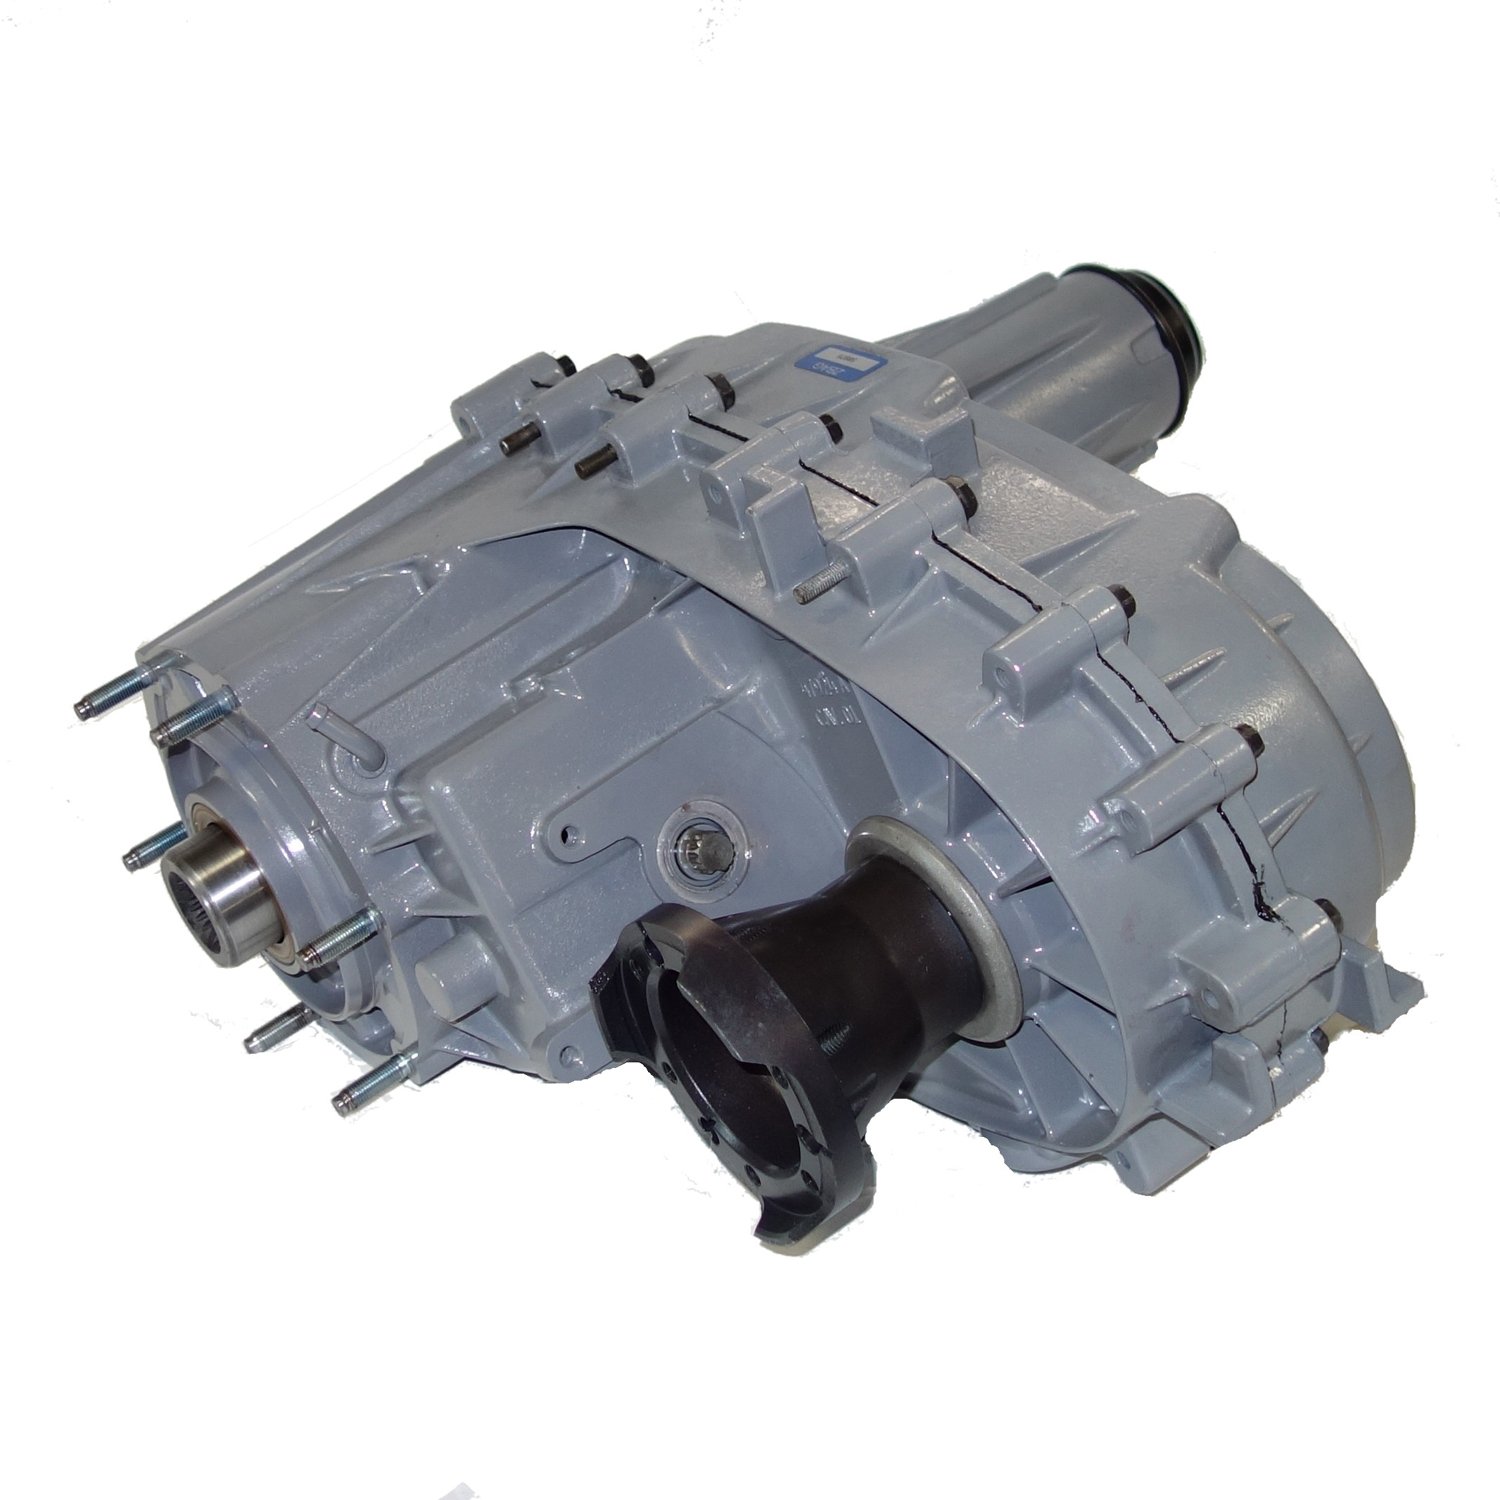 Remanufactured NP126 Electric Shift Transfer Case 2002-2009 GM